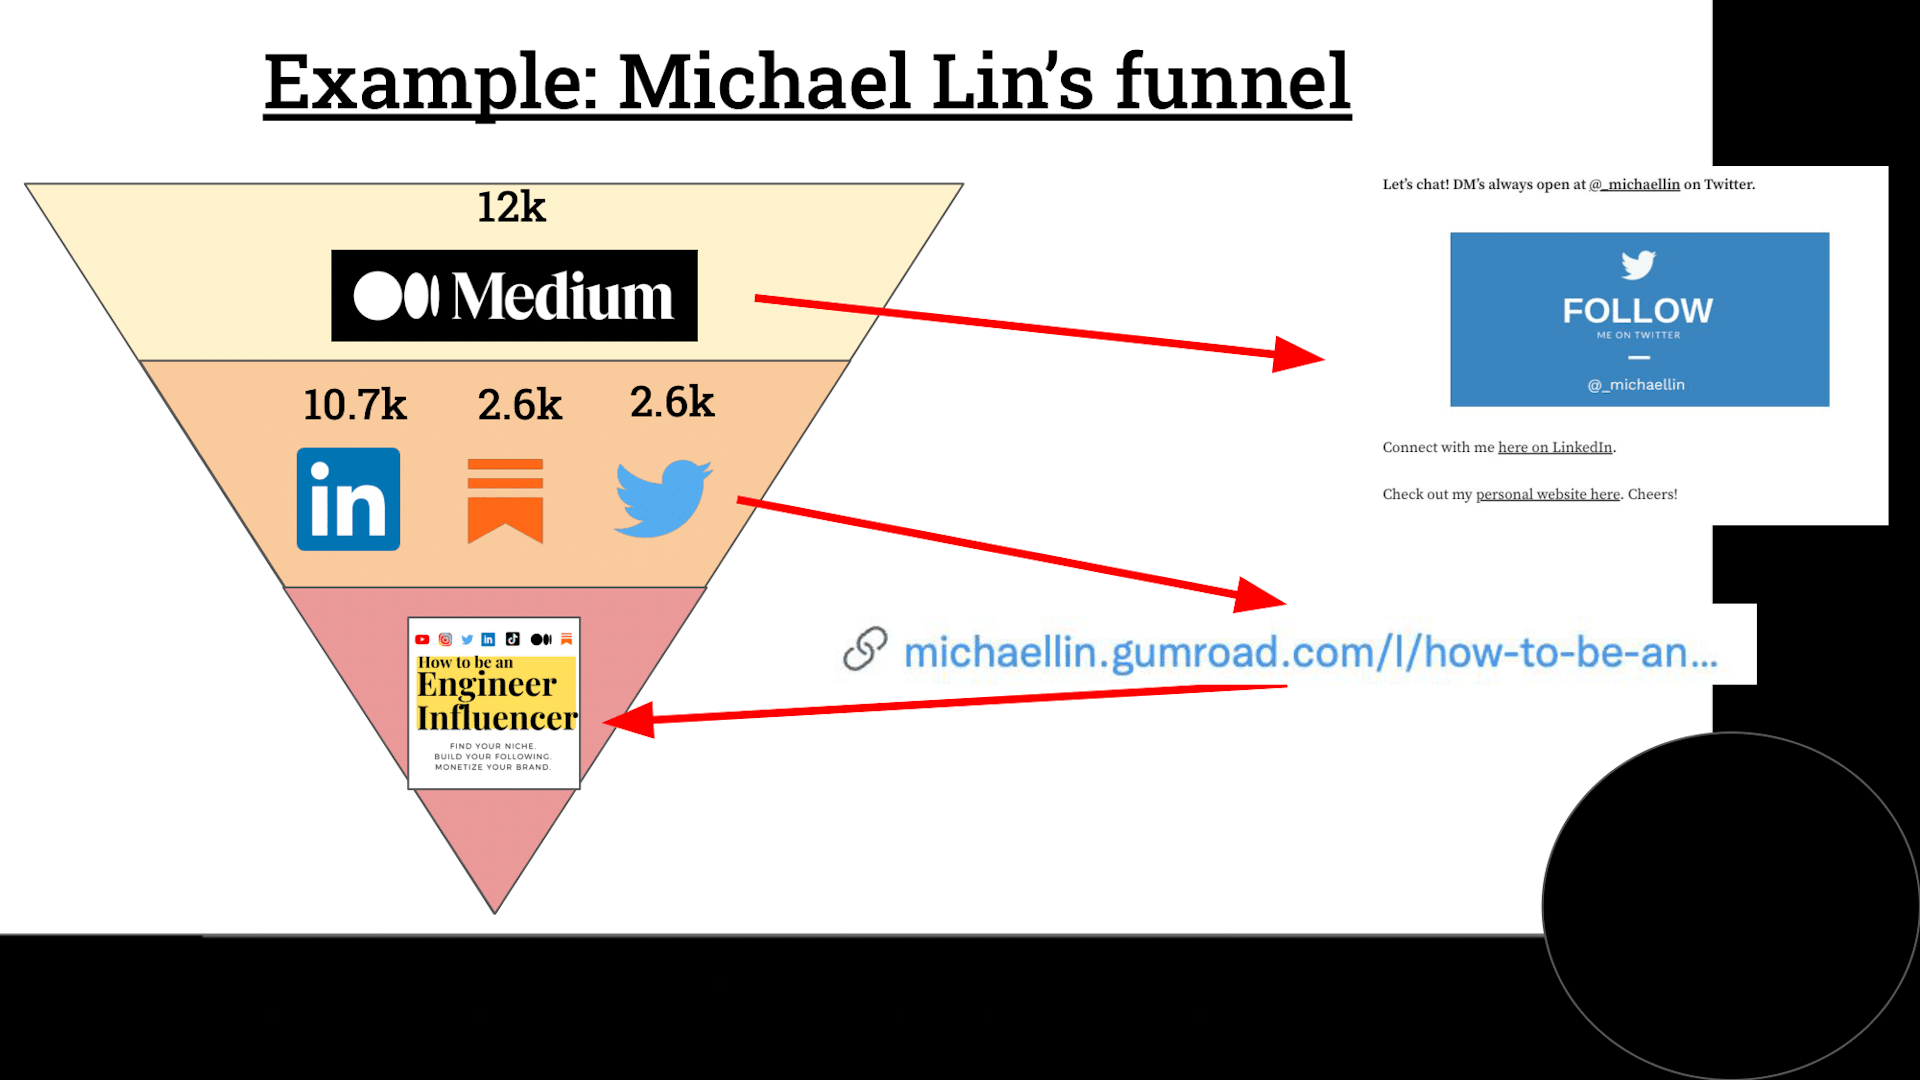 Become An Engineer Influencer [Part 4] - Strategy #2: Social Media is a Sales Funnel